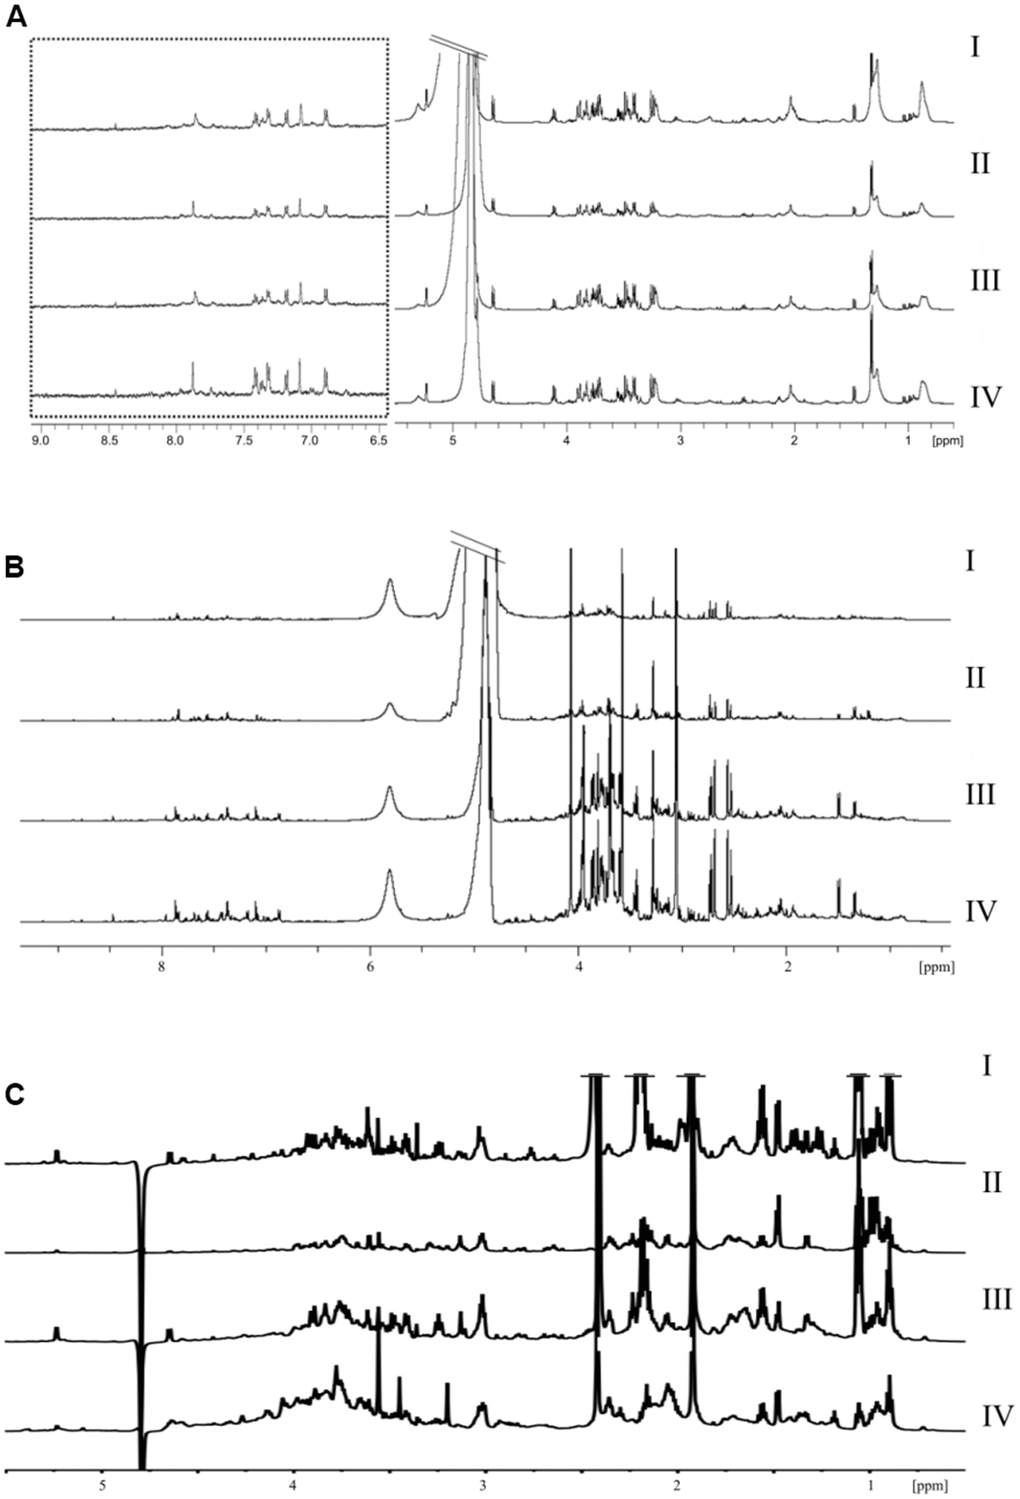 NMR chromatograms different samples and groups. (A) plasma (B) urine (C) feces.